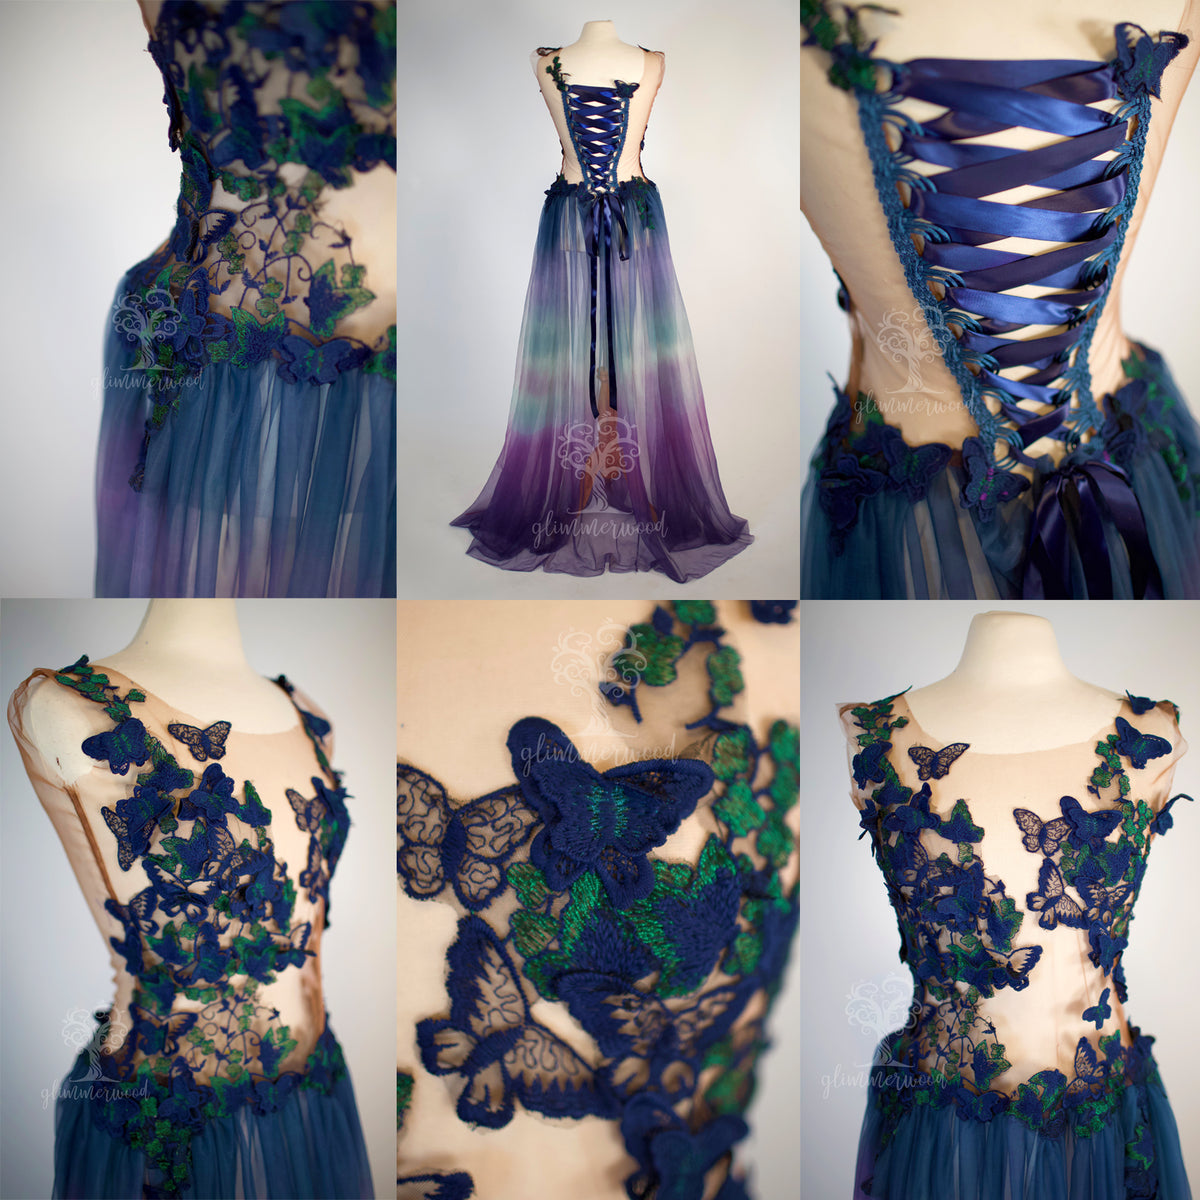 Delightful Mystery Gown - Created with PURE Imagination